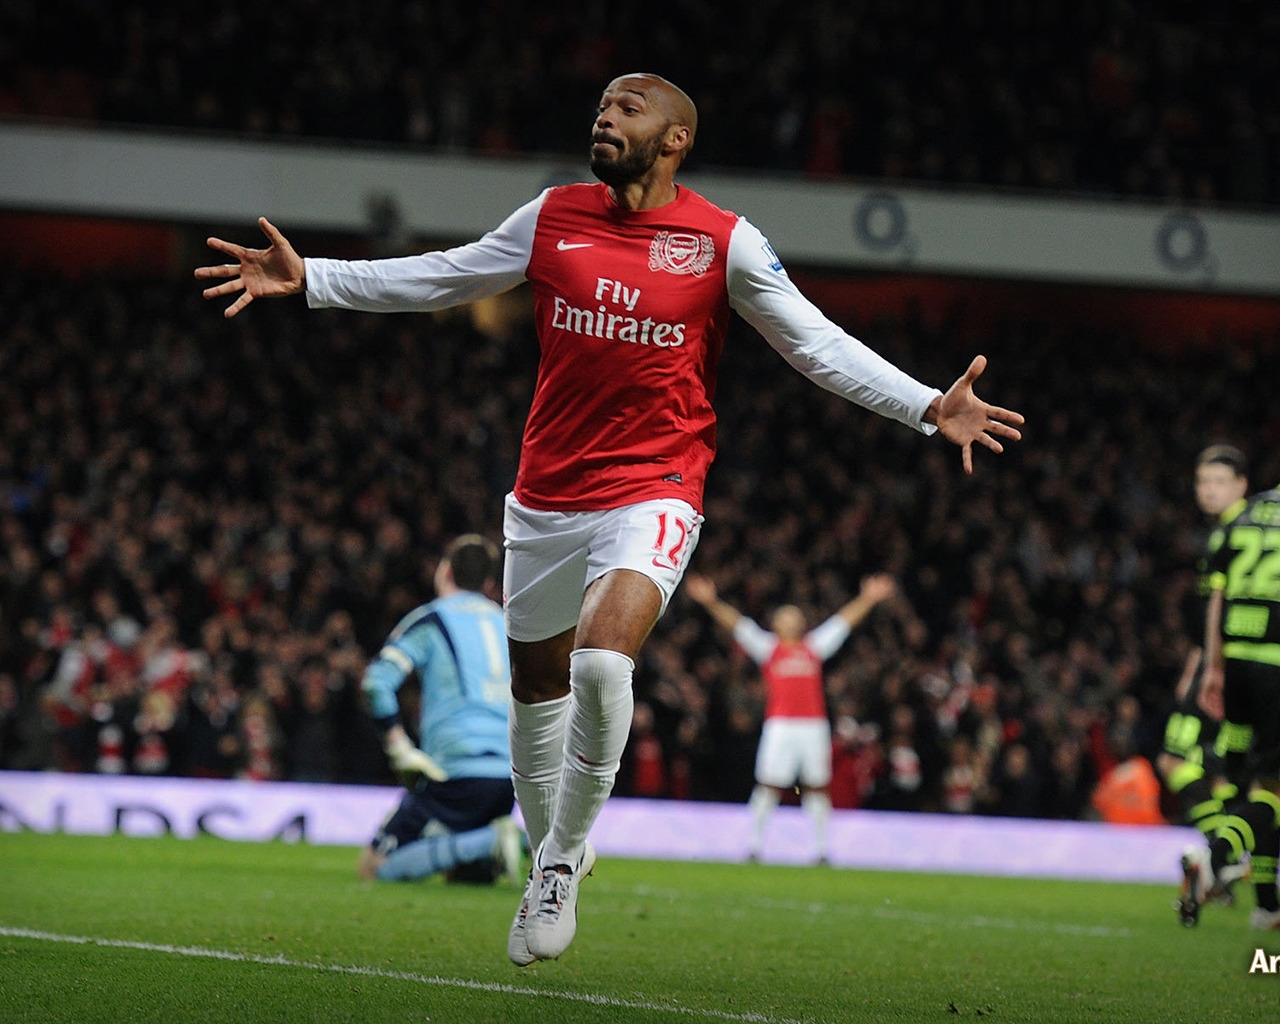 Thierry Henry for 1280 x 1024 resolution